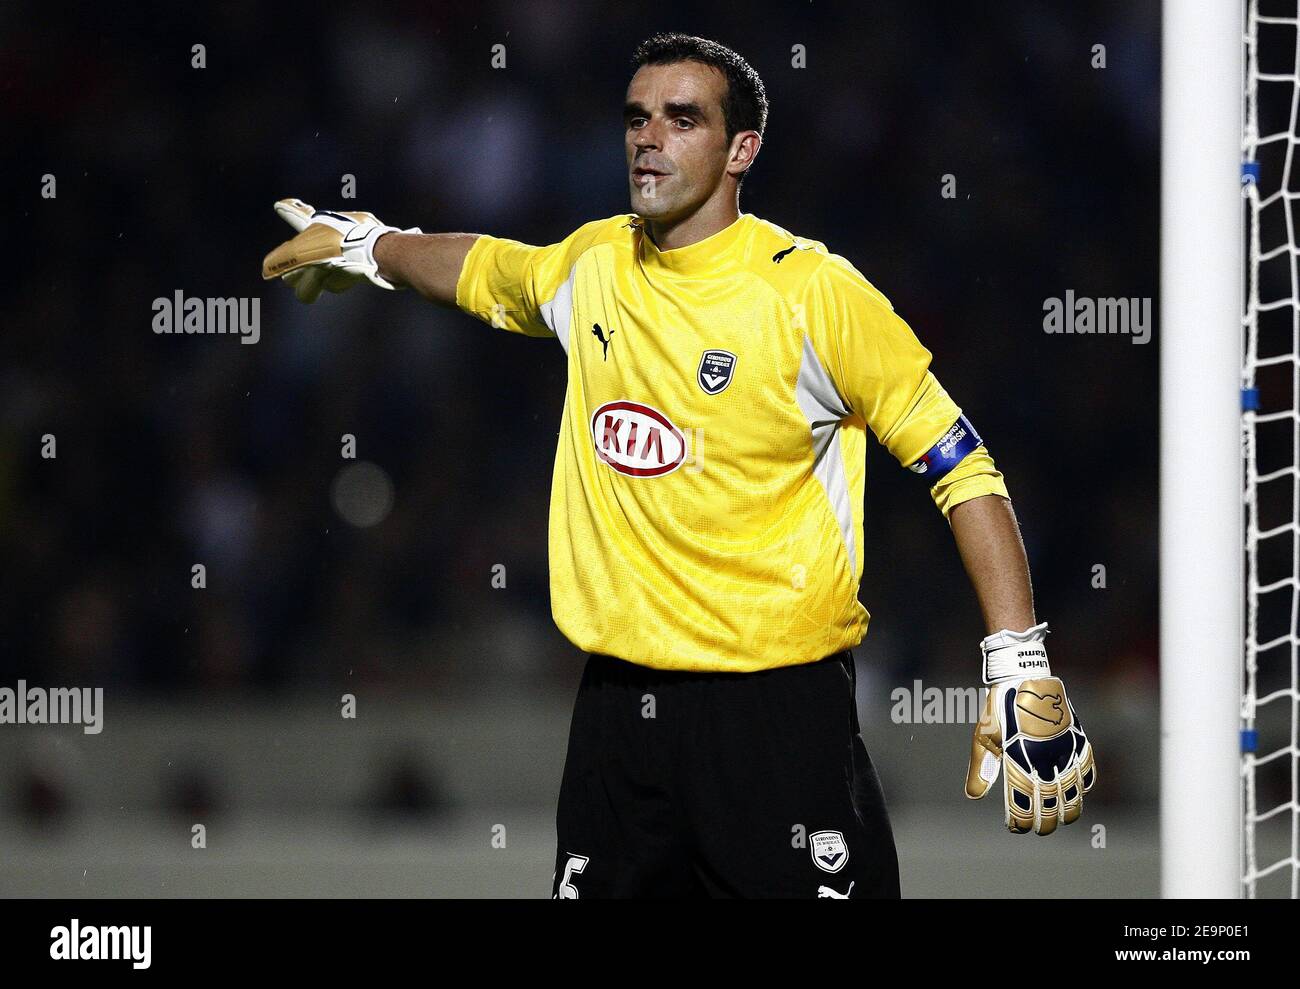 Bordeaux' Ulrich Rame during the UEFA Champions League, Group C, Girondins de Bordeaux vs Liverpool FC at the Stade Chaban-Delmas in Bordeaux, France on October 18, 2006. Liverpool won 1-0. Photo by Christian Liewig/ABACAPRESS.COM Stock Photo